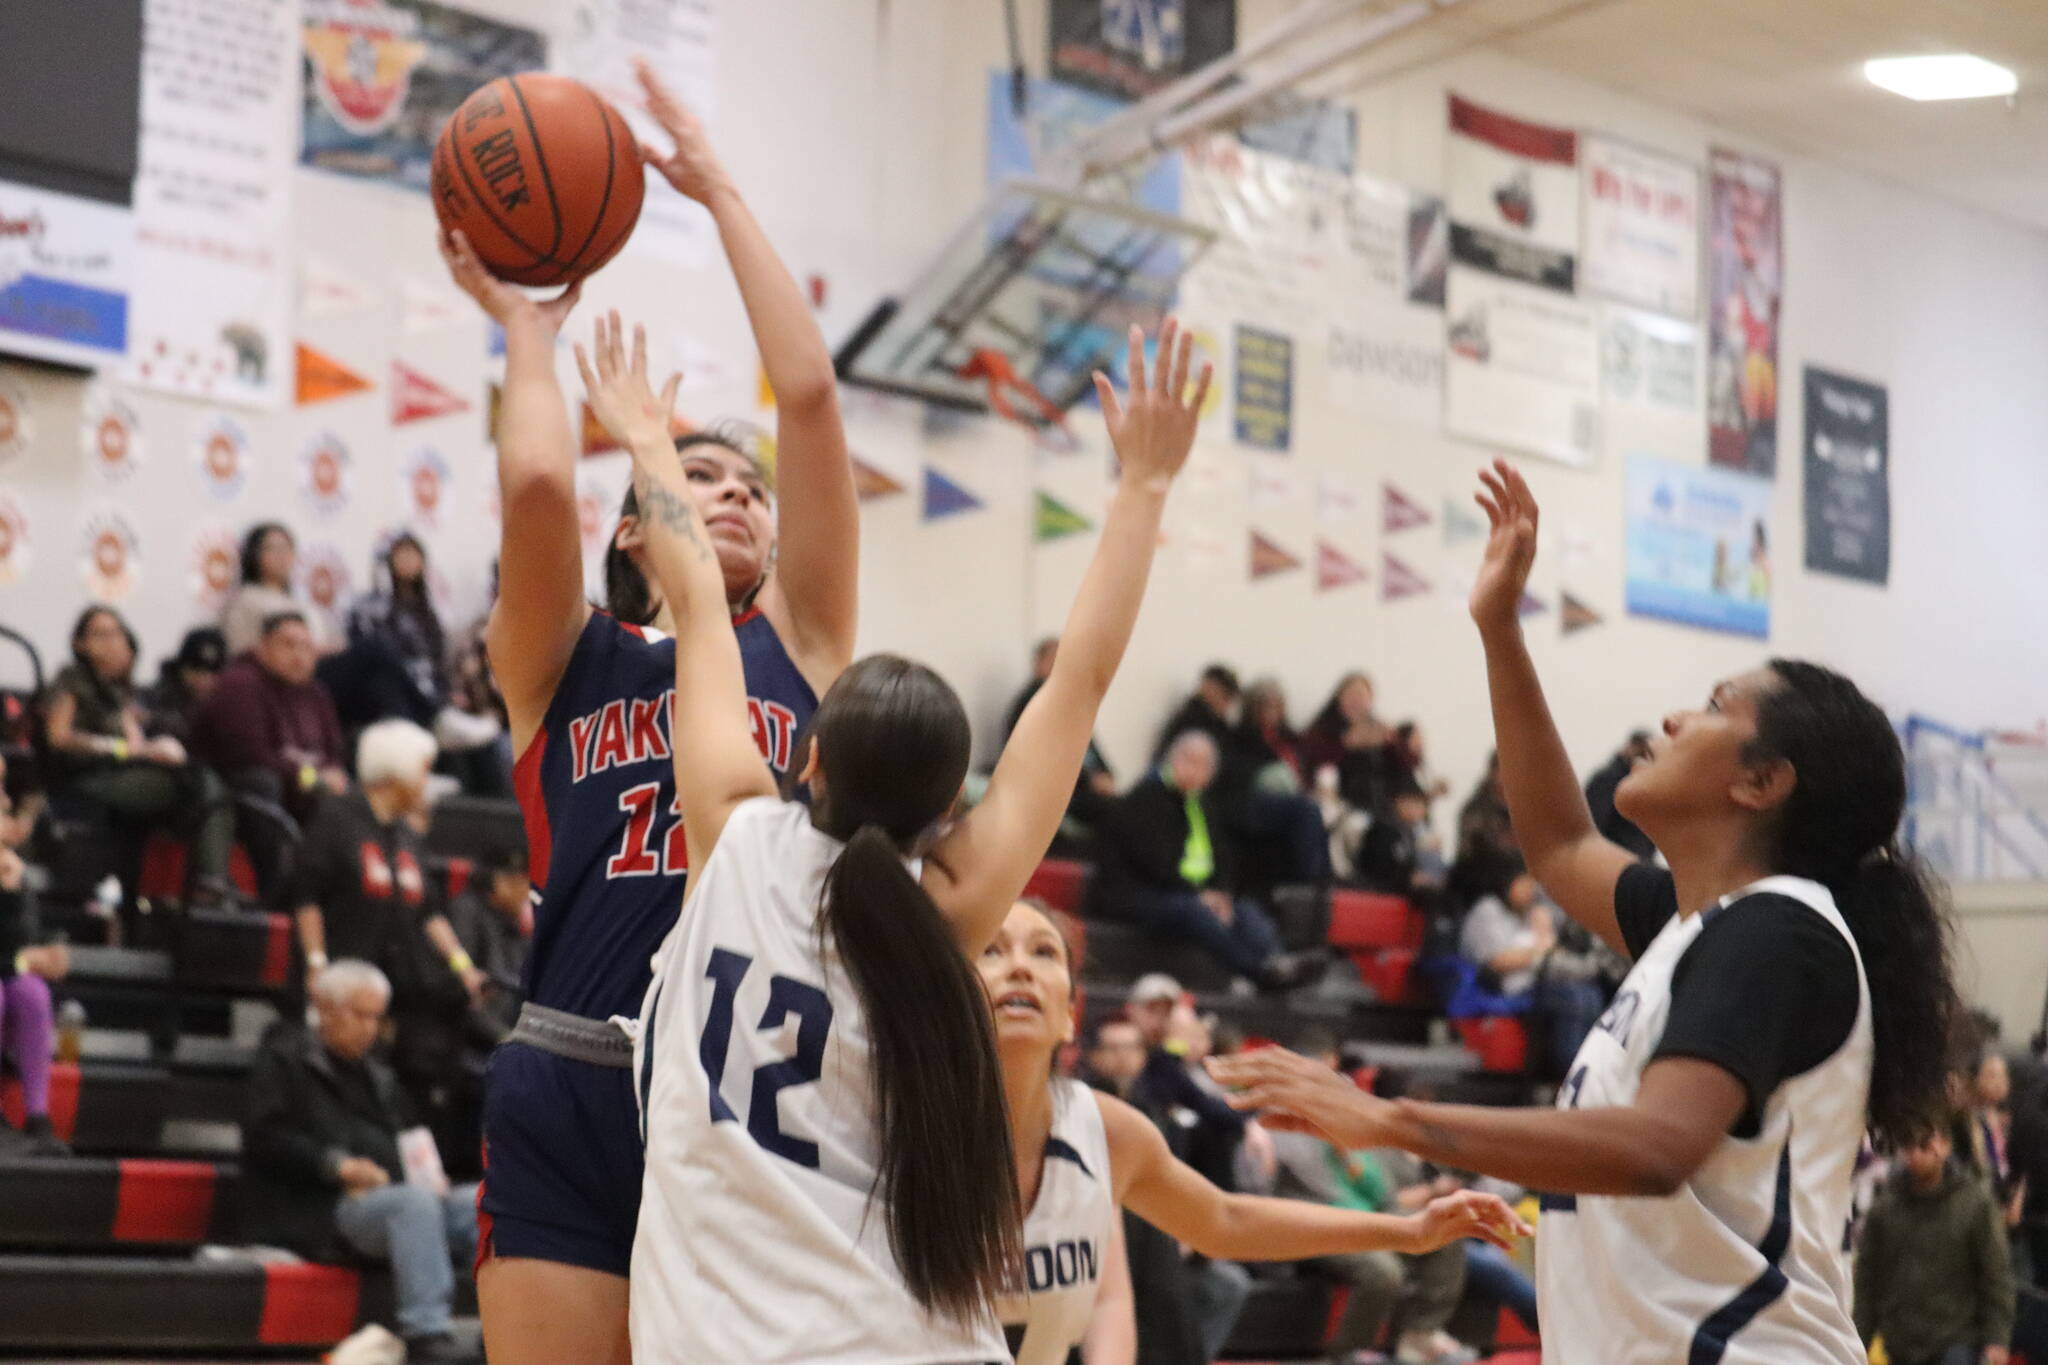 Yakutat’s Trinity Jackson takes a contested shot during a win against Angoon Tuesday for the Gold Medal basketball tournament. Jackson finished the game with a total of 11 points. (Jonson Kuhn / Juneau Empire)